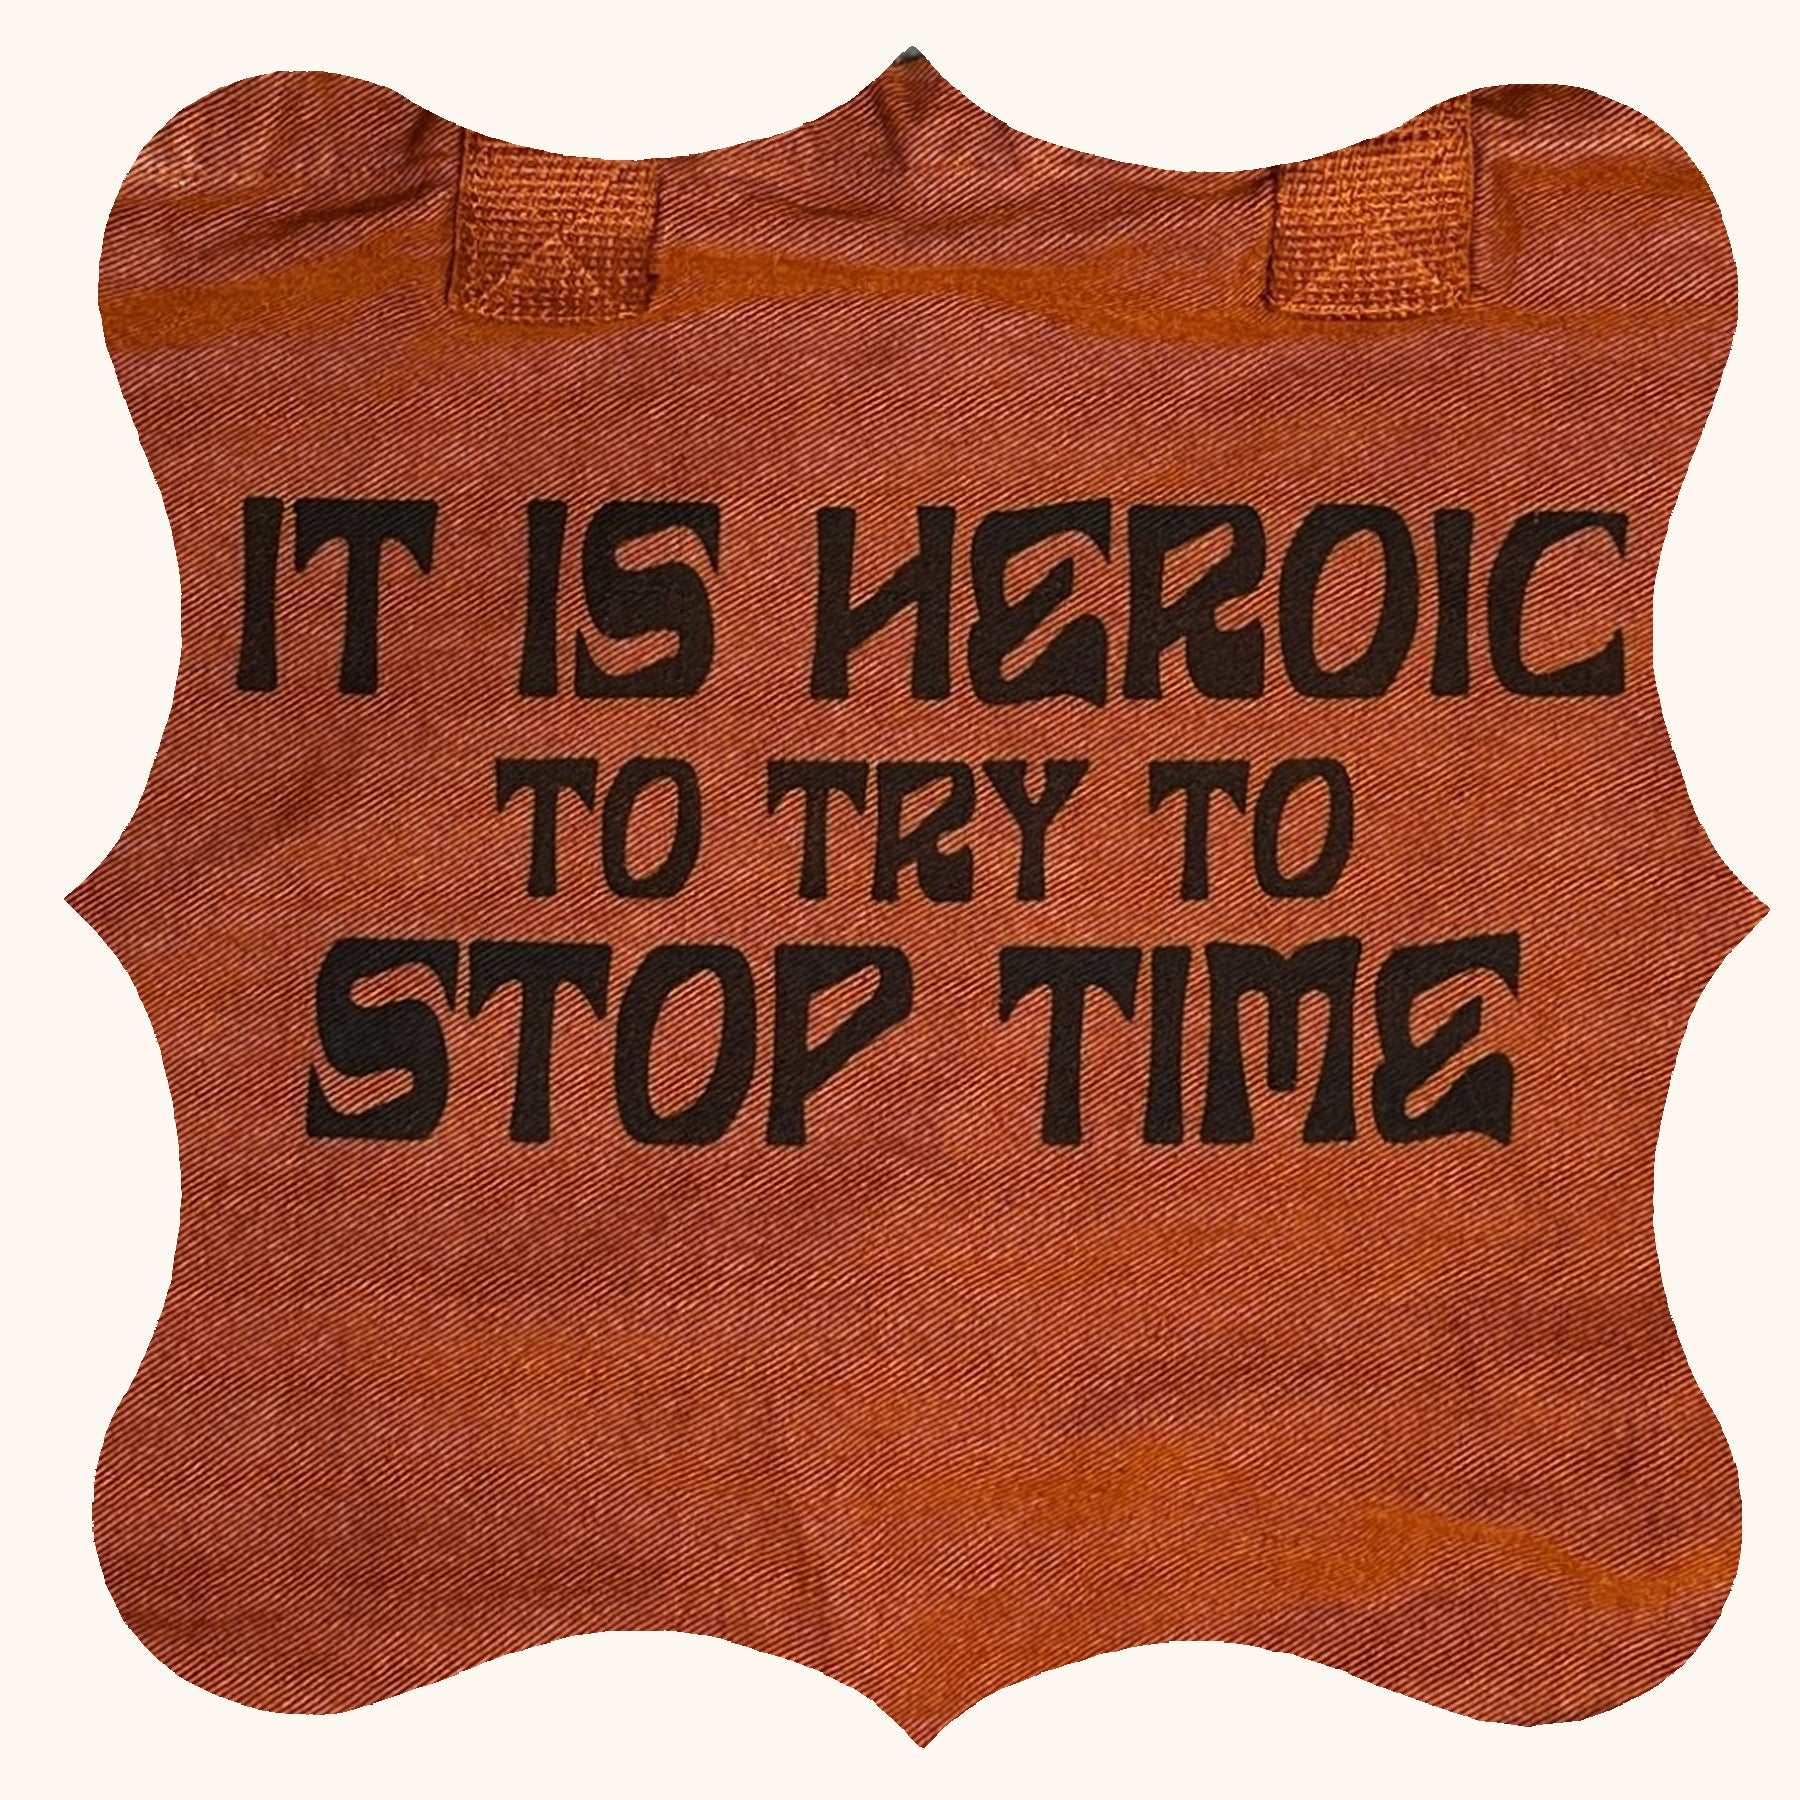 It is Heroic to Try to Stop Time Tote Bag